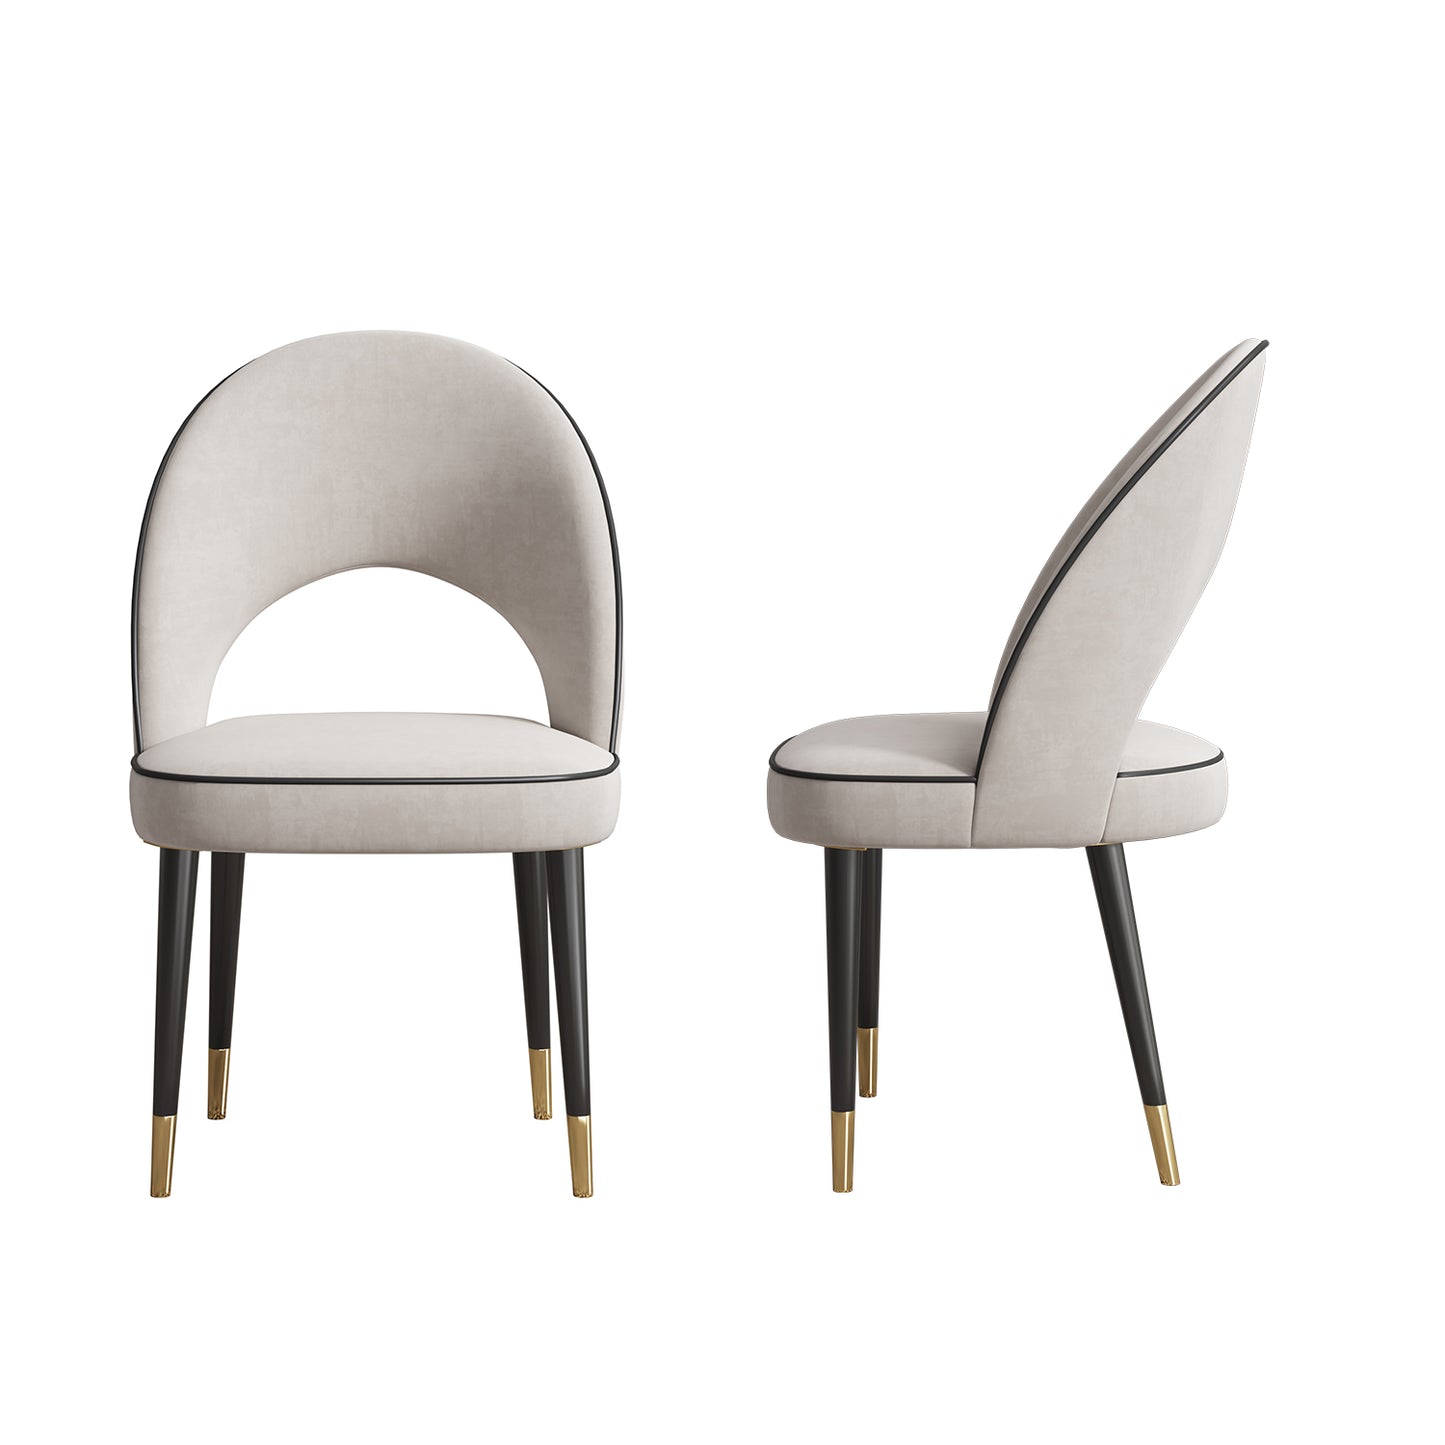 JASIWAY Dining 2 Chairs